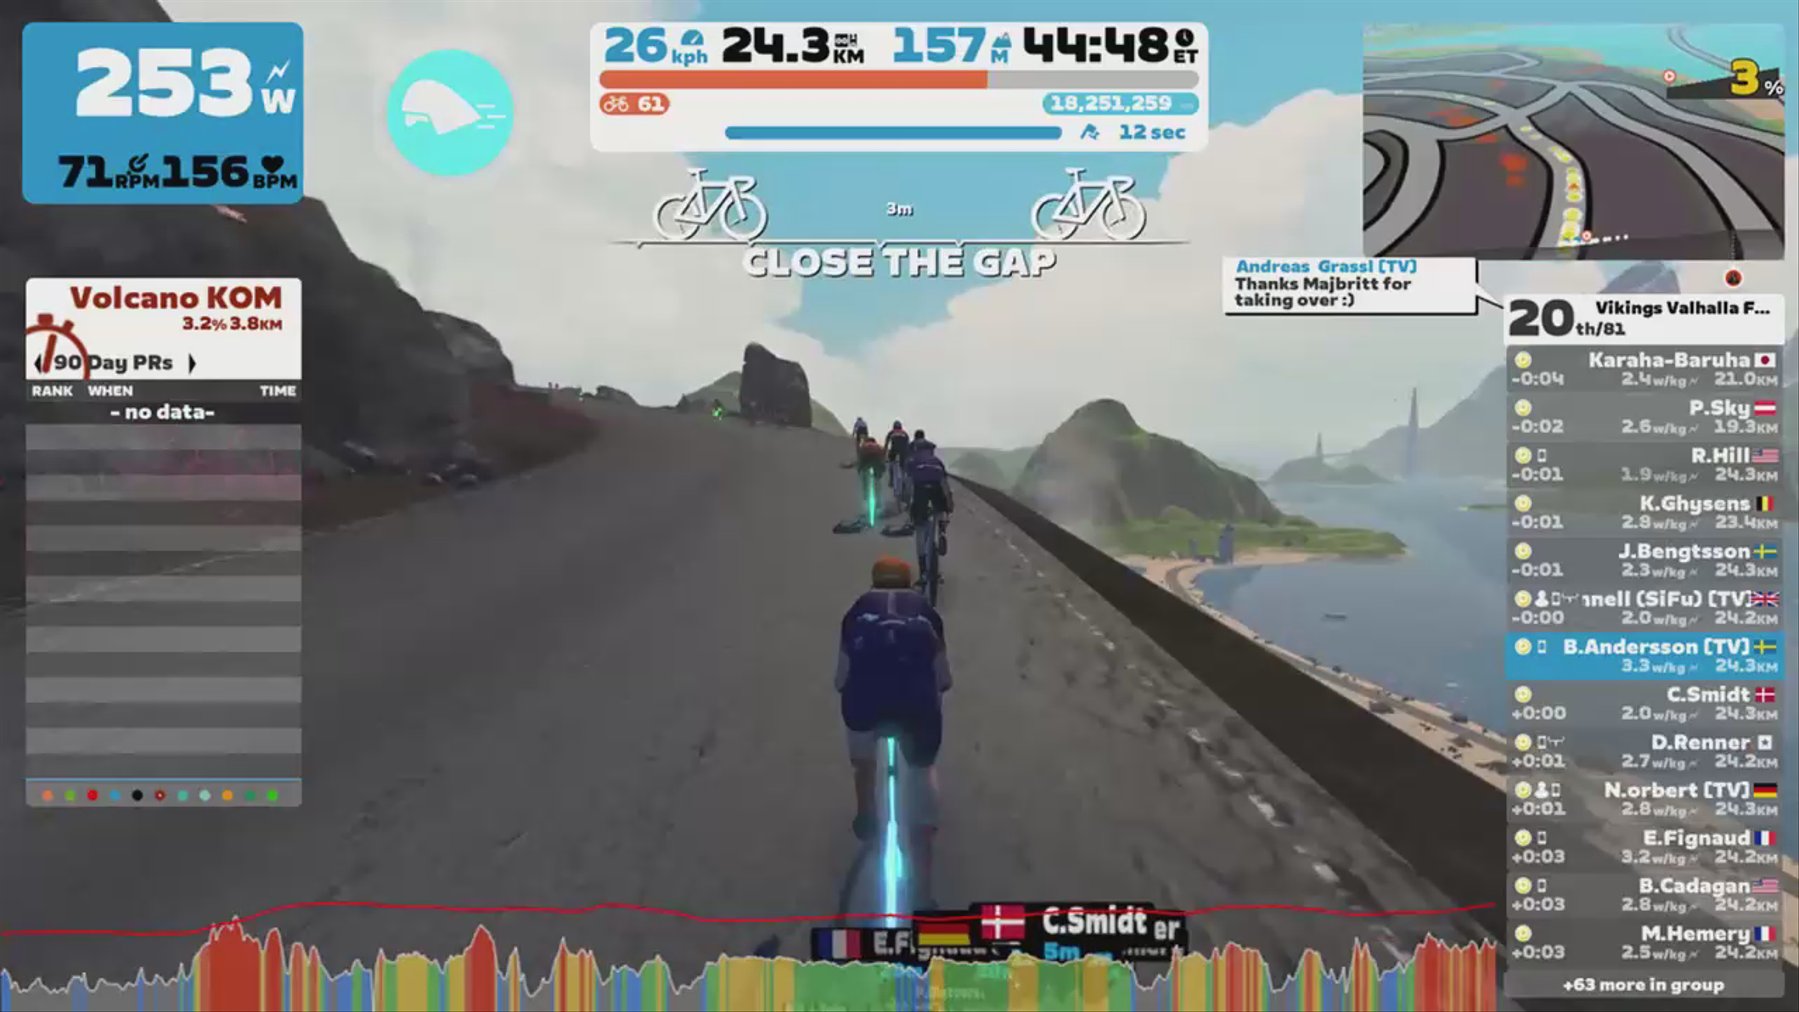 Zwift - Group Ride: Vikings Valhalla Fatburn Ride (D) on Out And Back Again in Watopia